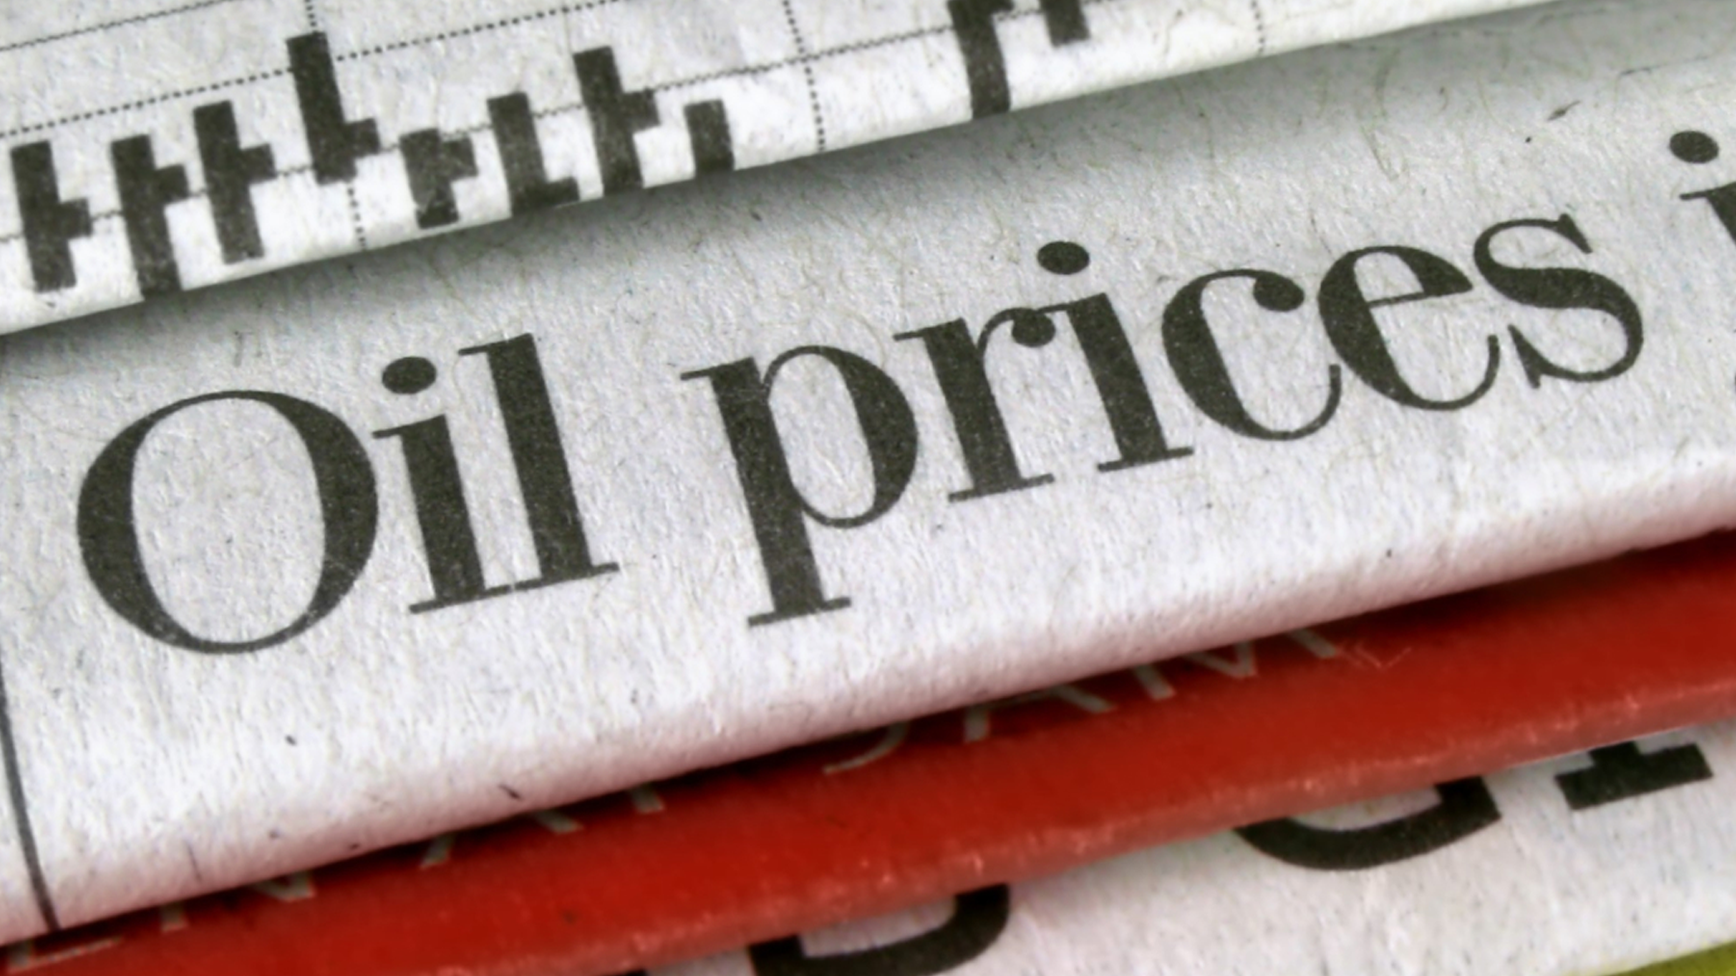 A newspaper shows a headline warning of oil price rises.